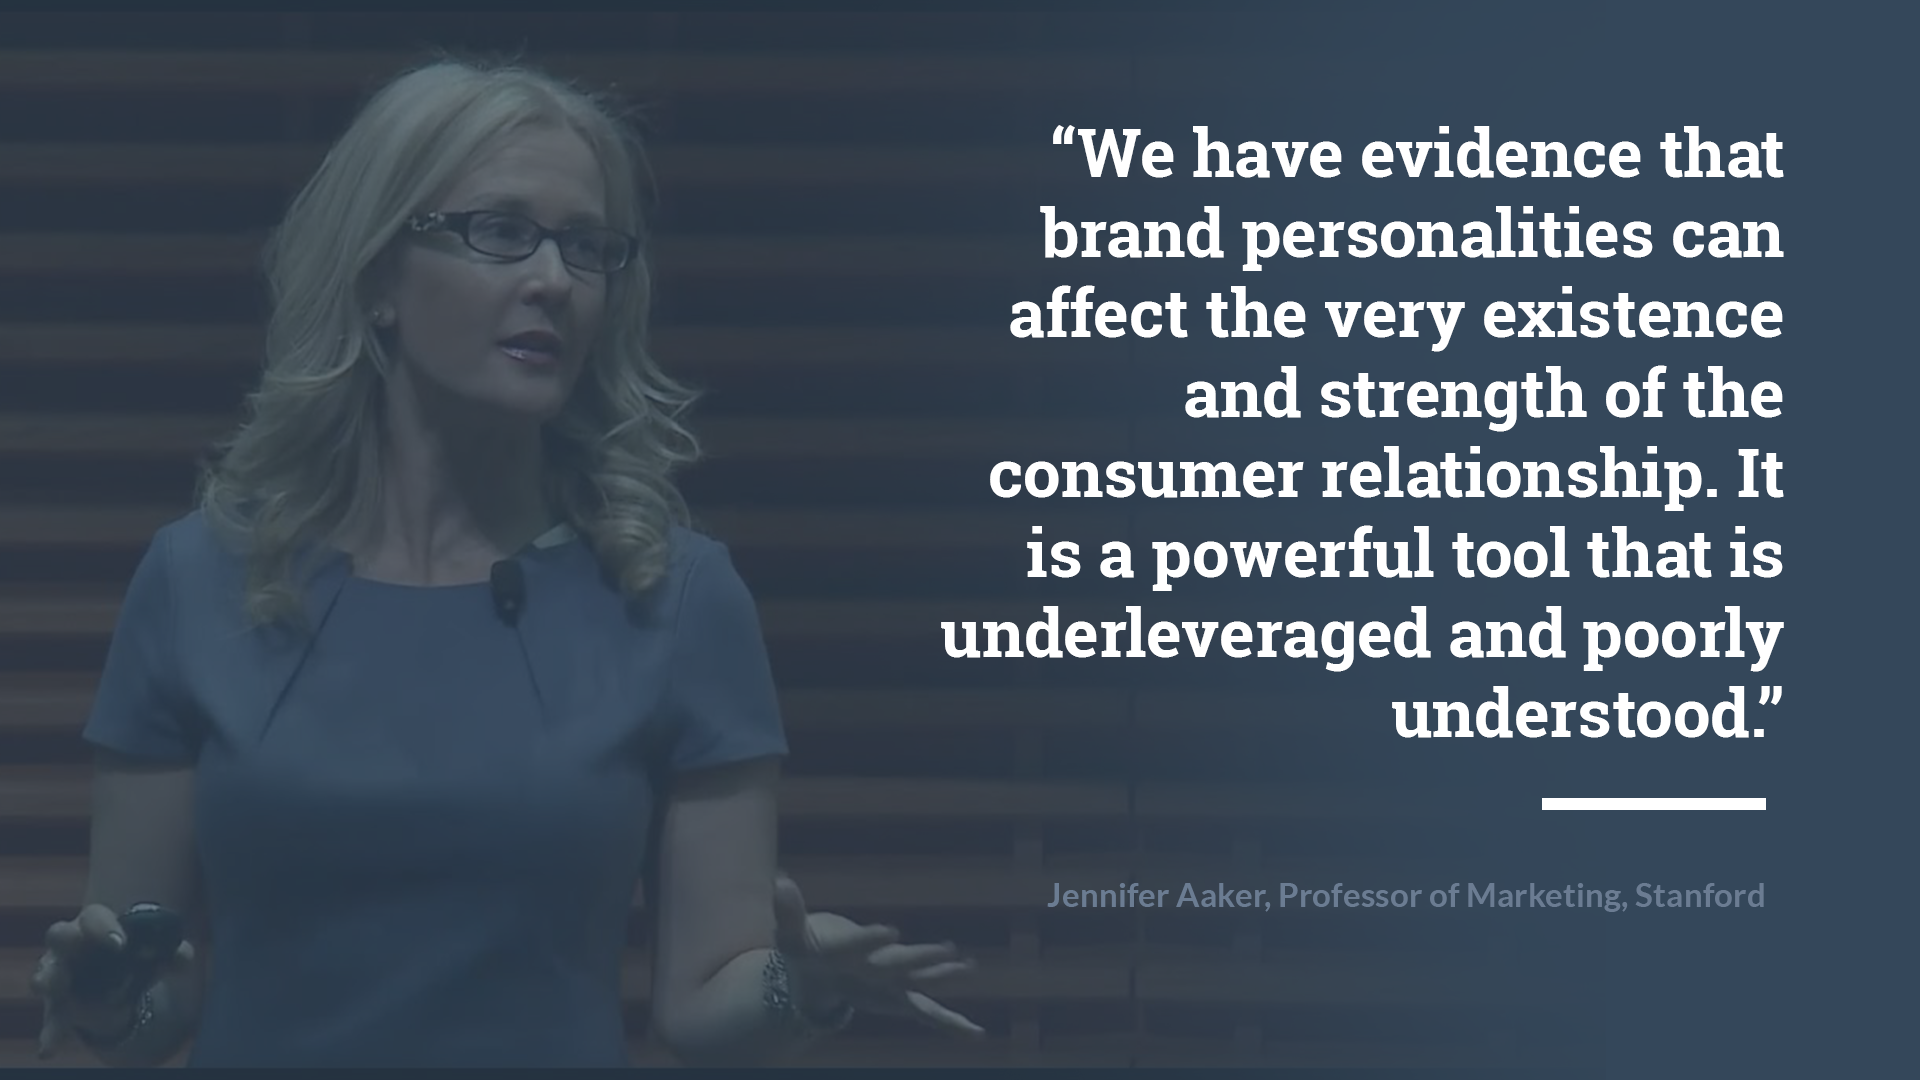 Quote by jennifer aaker: 'we have evidence that brand personalities can affect the very existence and strength of the consumer relationship. it is a powerful tool that is underleveraged and poorly understood'